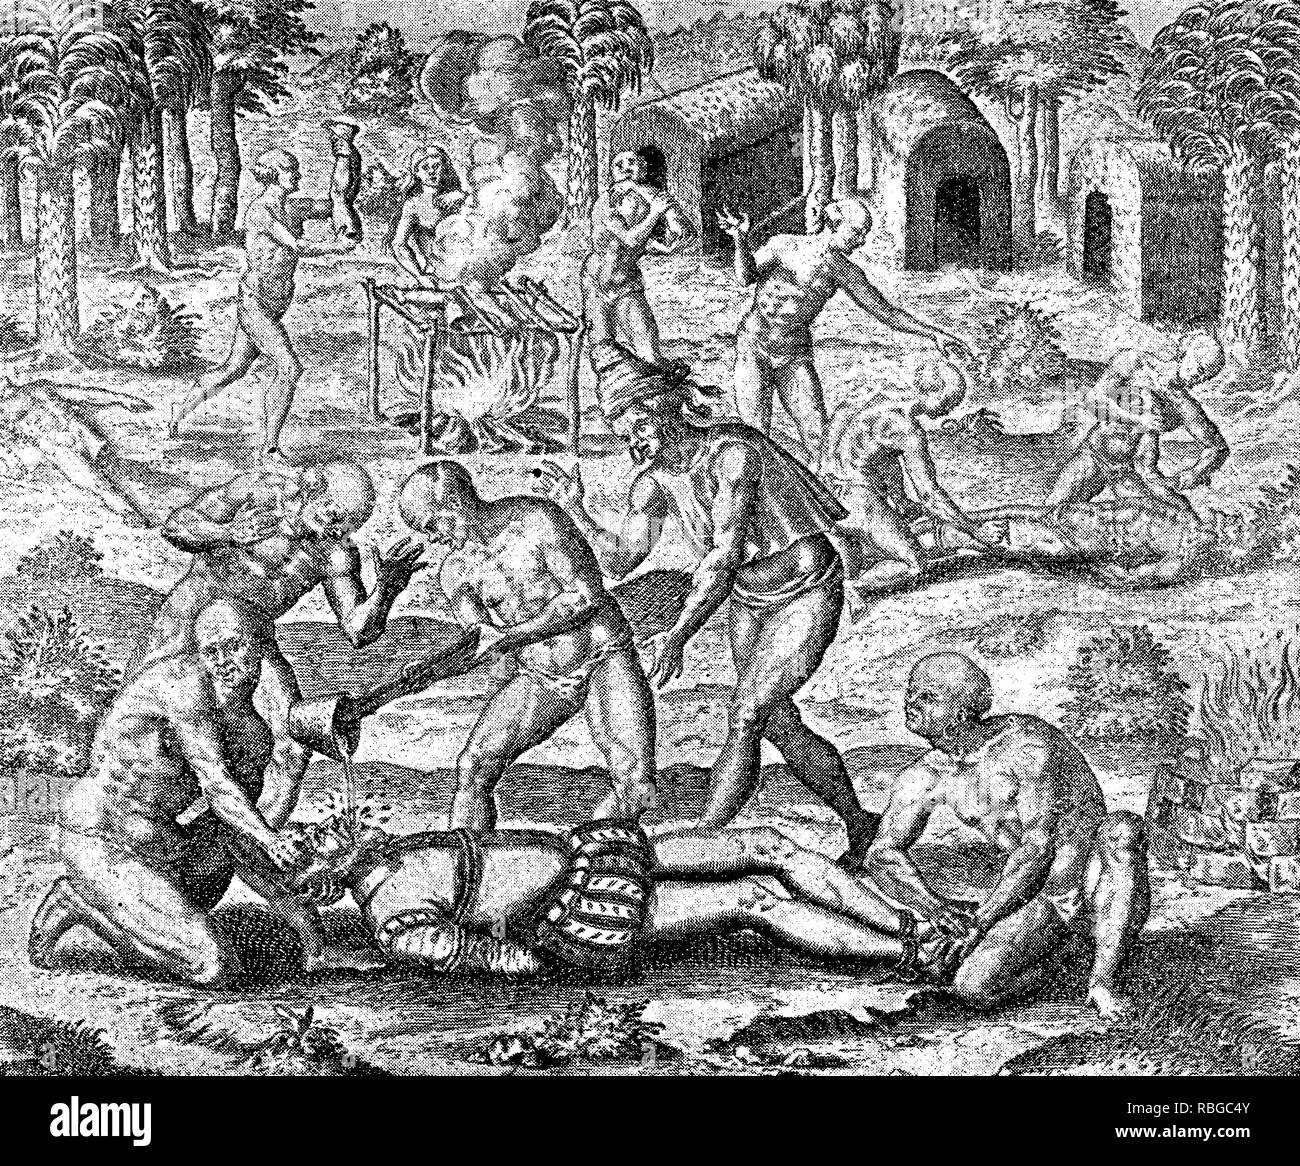 conquest of the Inca empire by Spanish conquistador Francisco Pizarro in XVI century: aborigines throw liquid gold into the throat of a Spanish soldier, white other indians cook human flesh Stock Photo